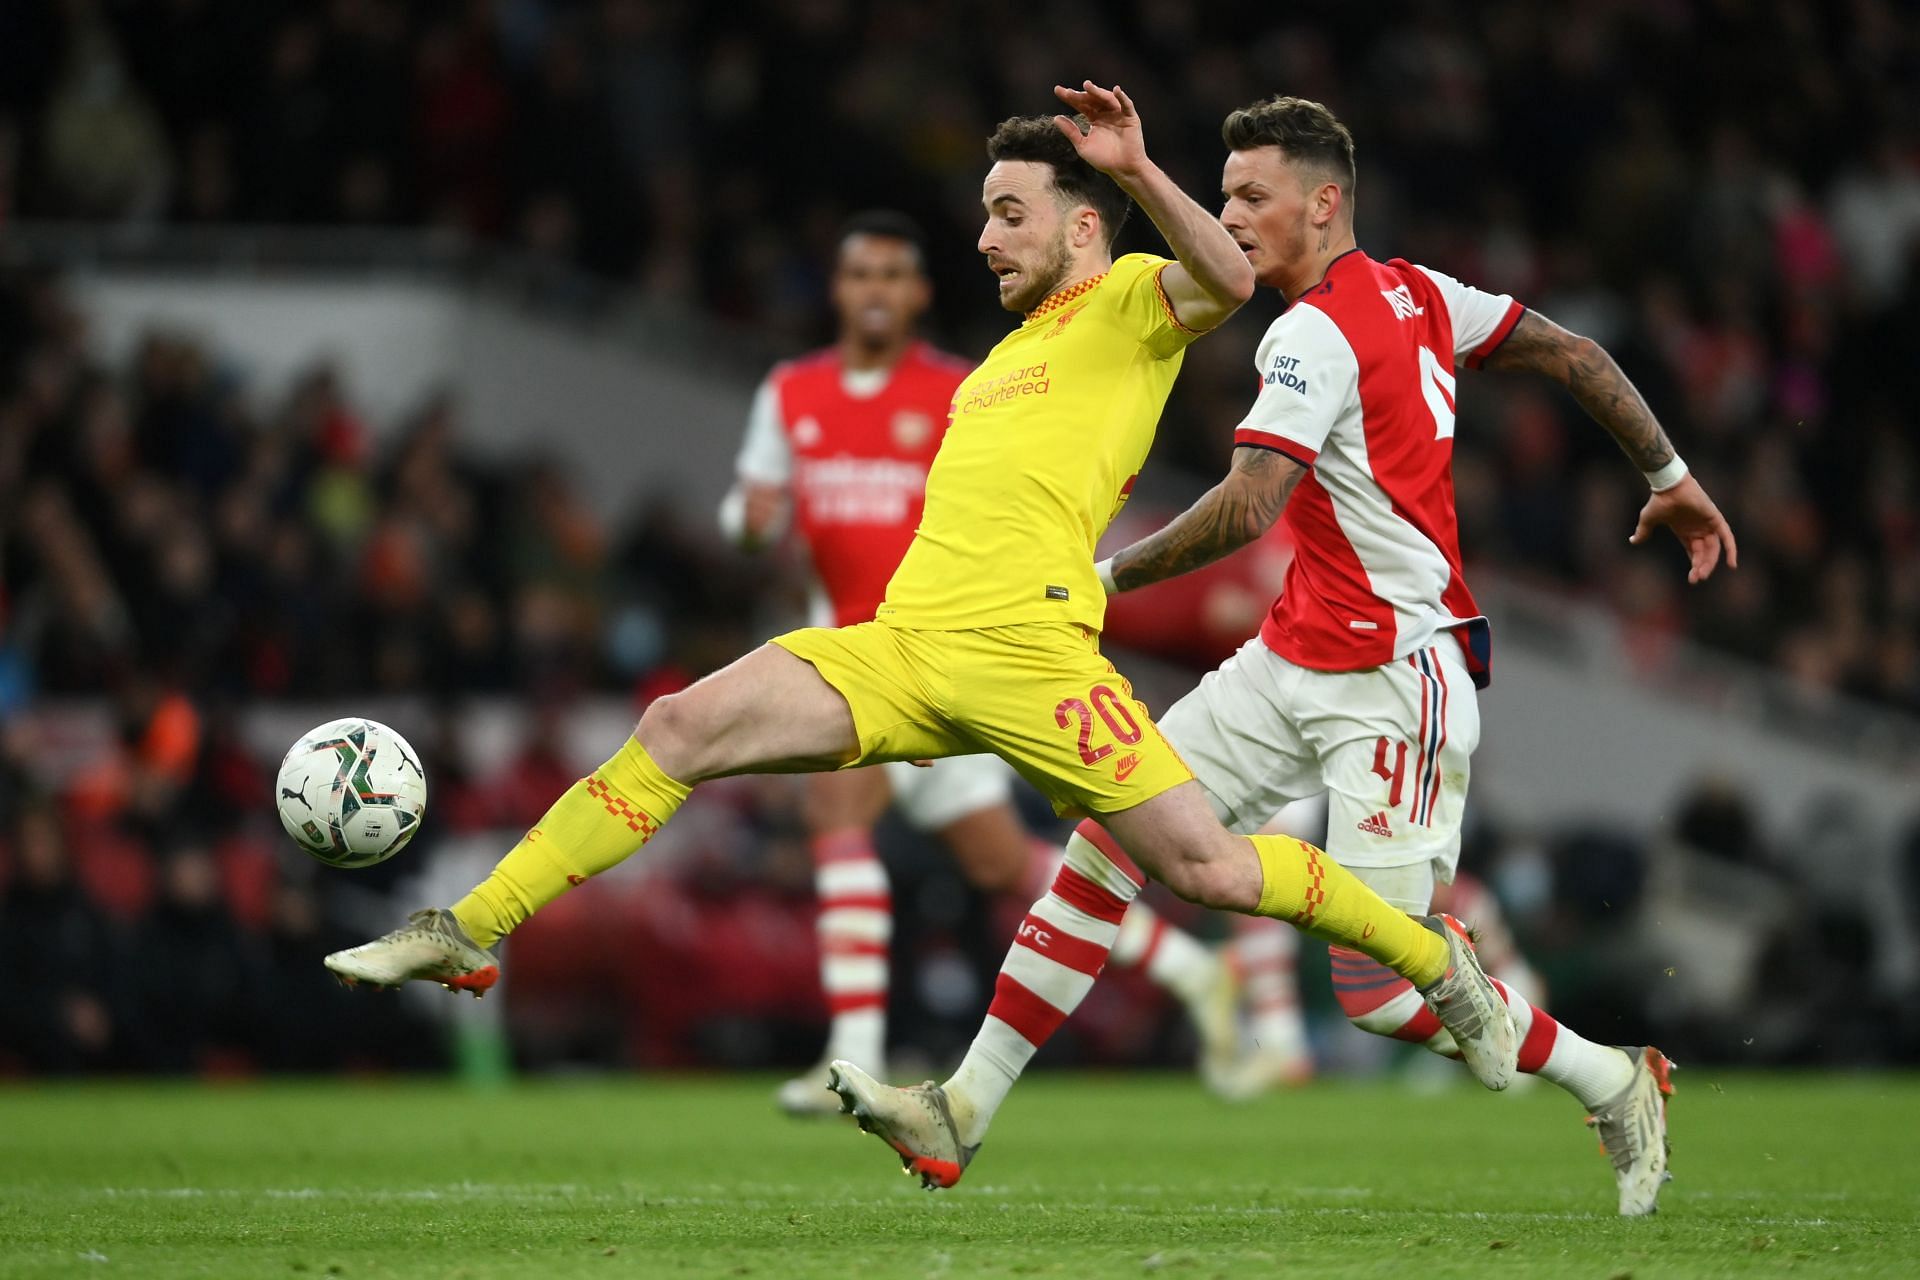 Diogo Jota tormented the Arsenal backline with his constant pressing on the night.